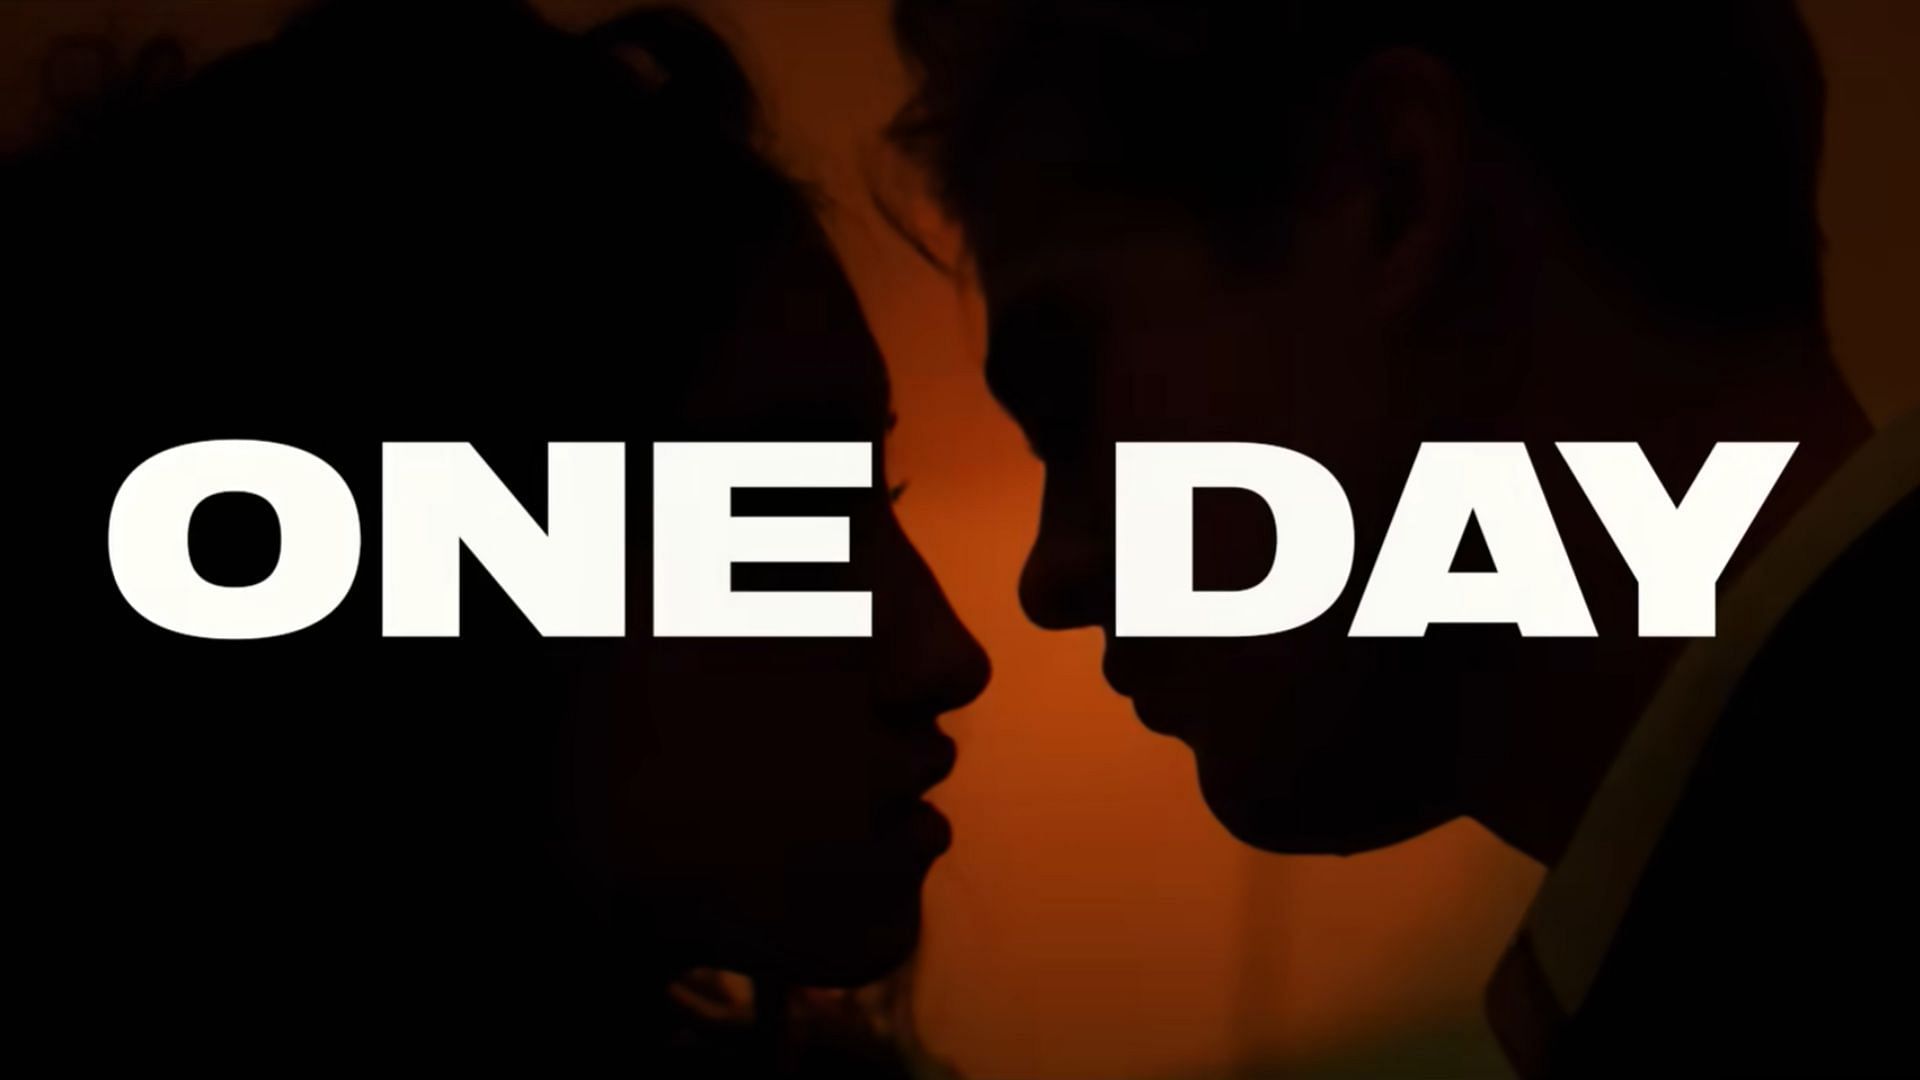 all episodes of One Day are streaming on Netflix (Image via Netflix)